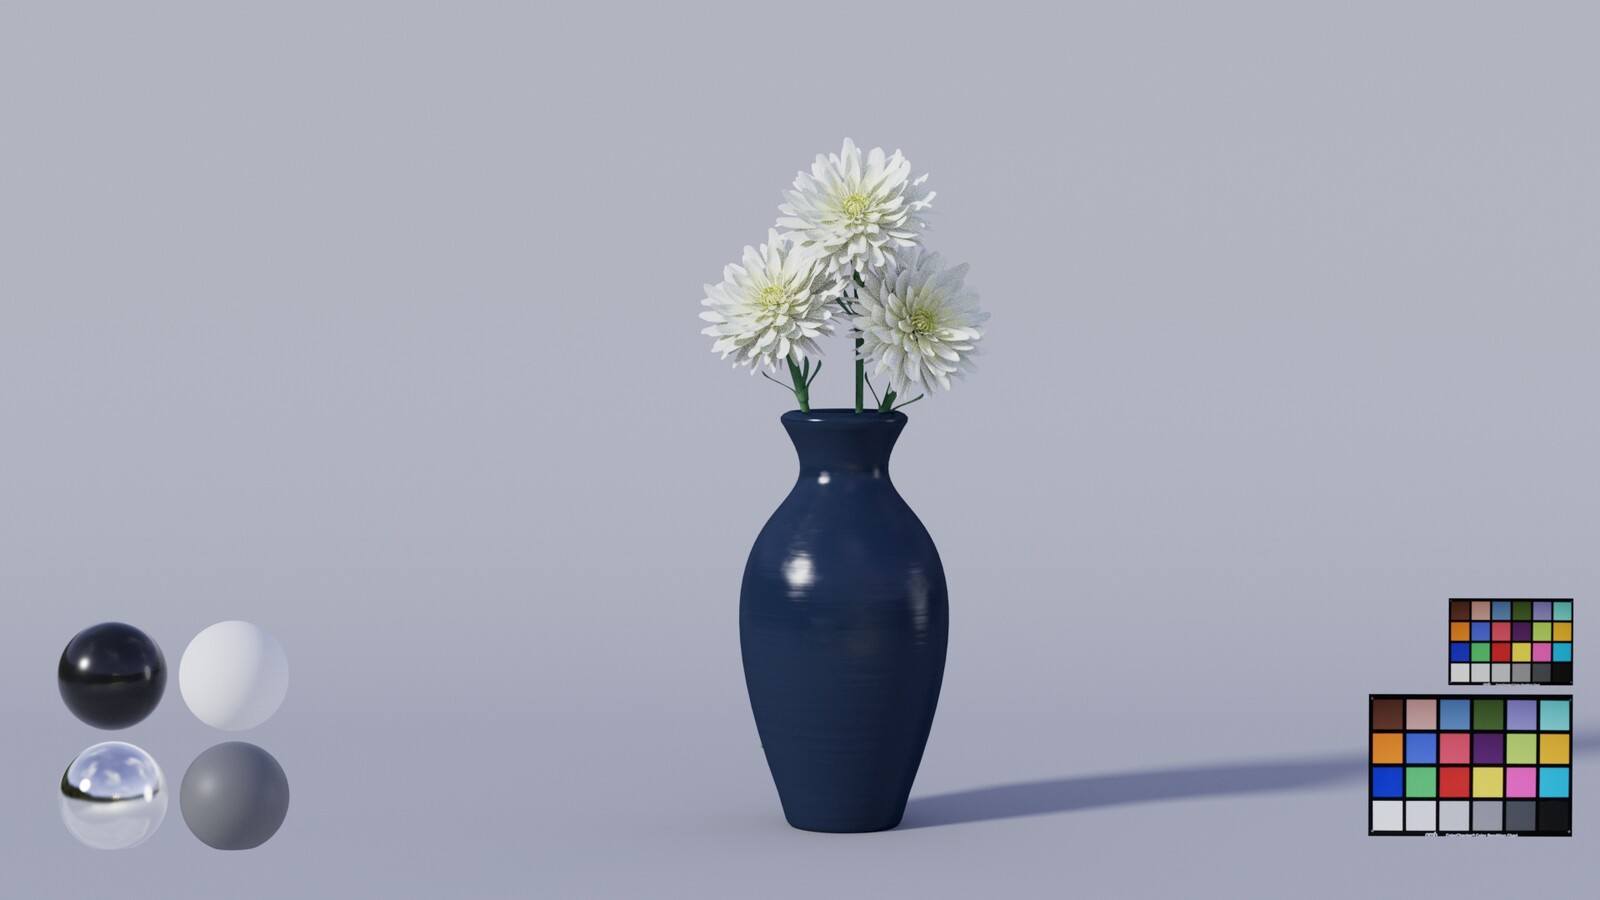 Responsible for Vase Model and Texture and Flower Surfacing